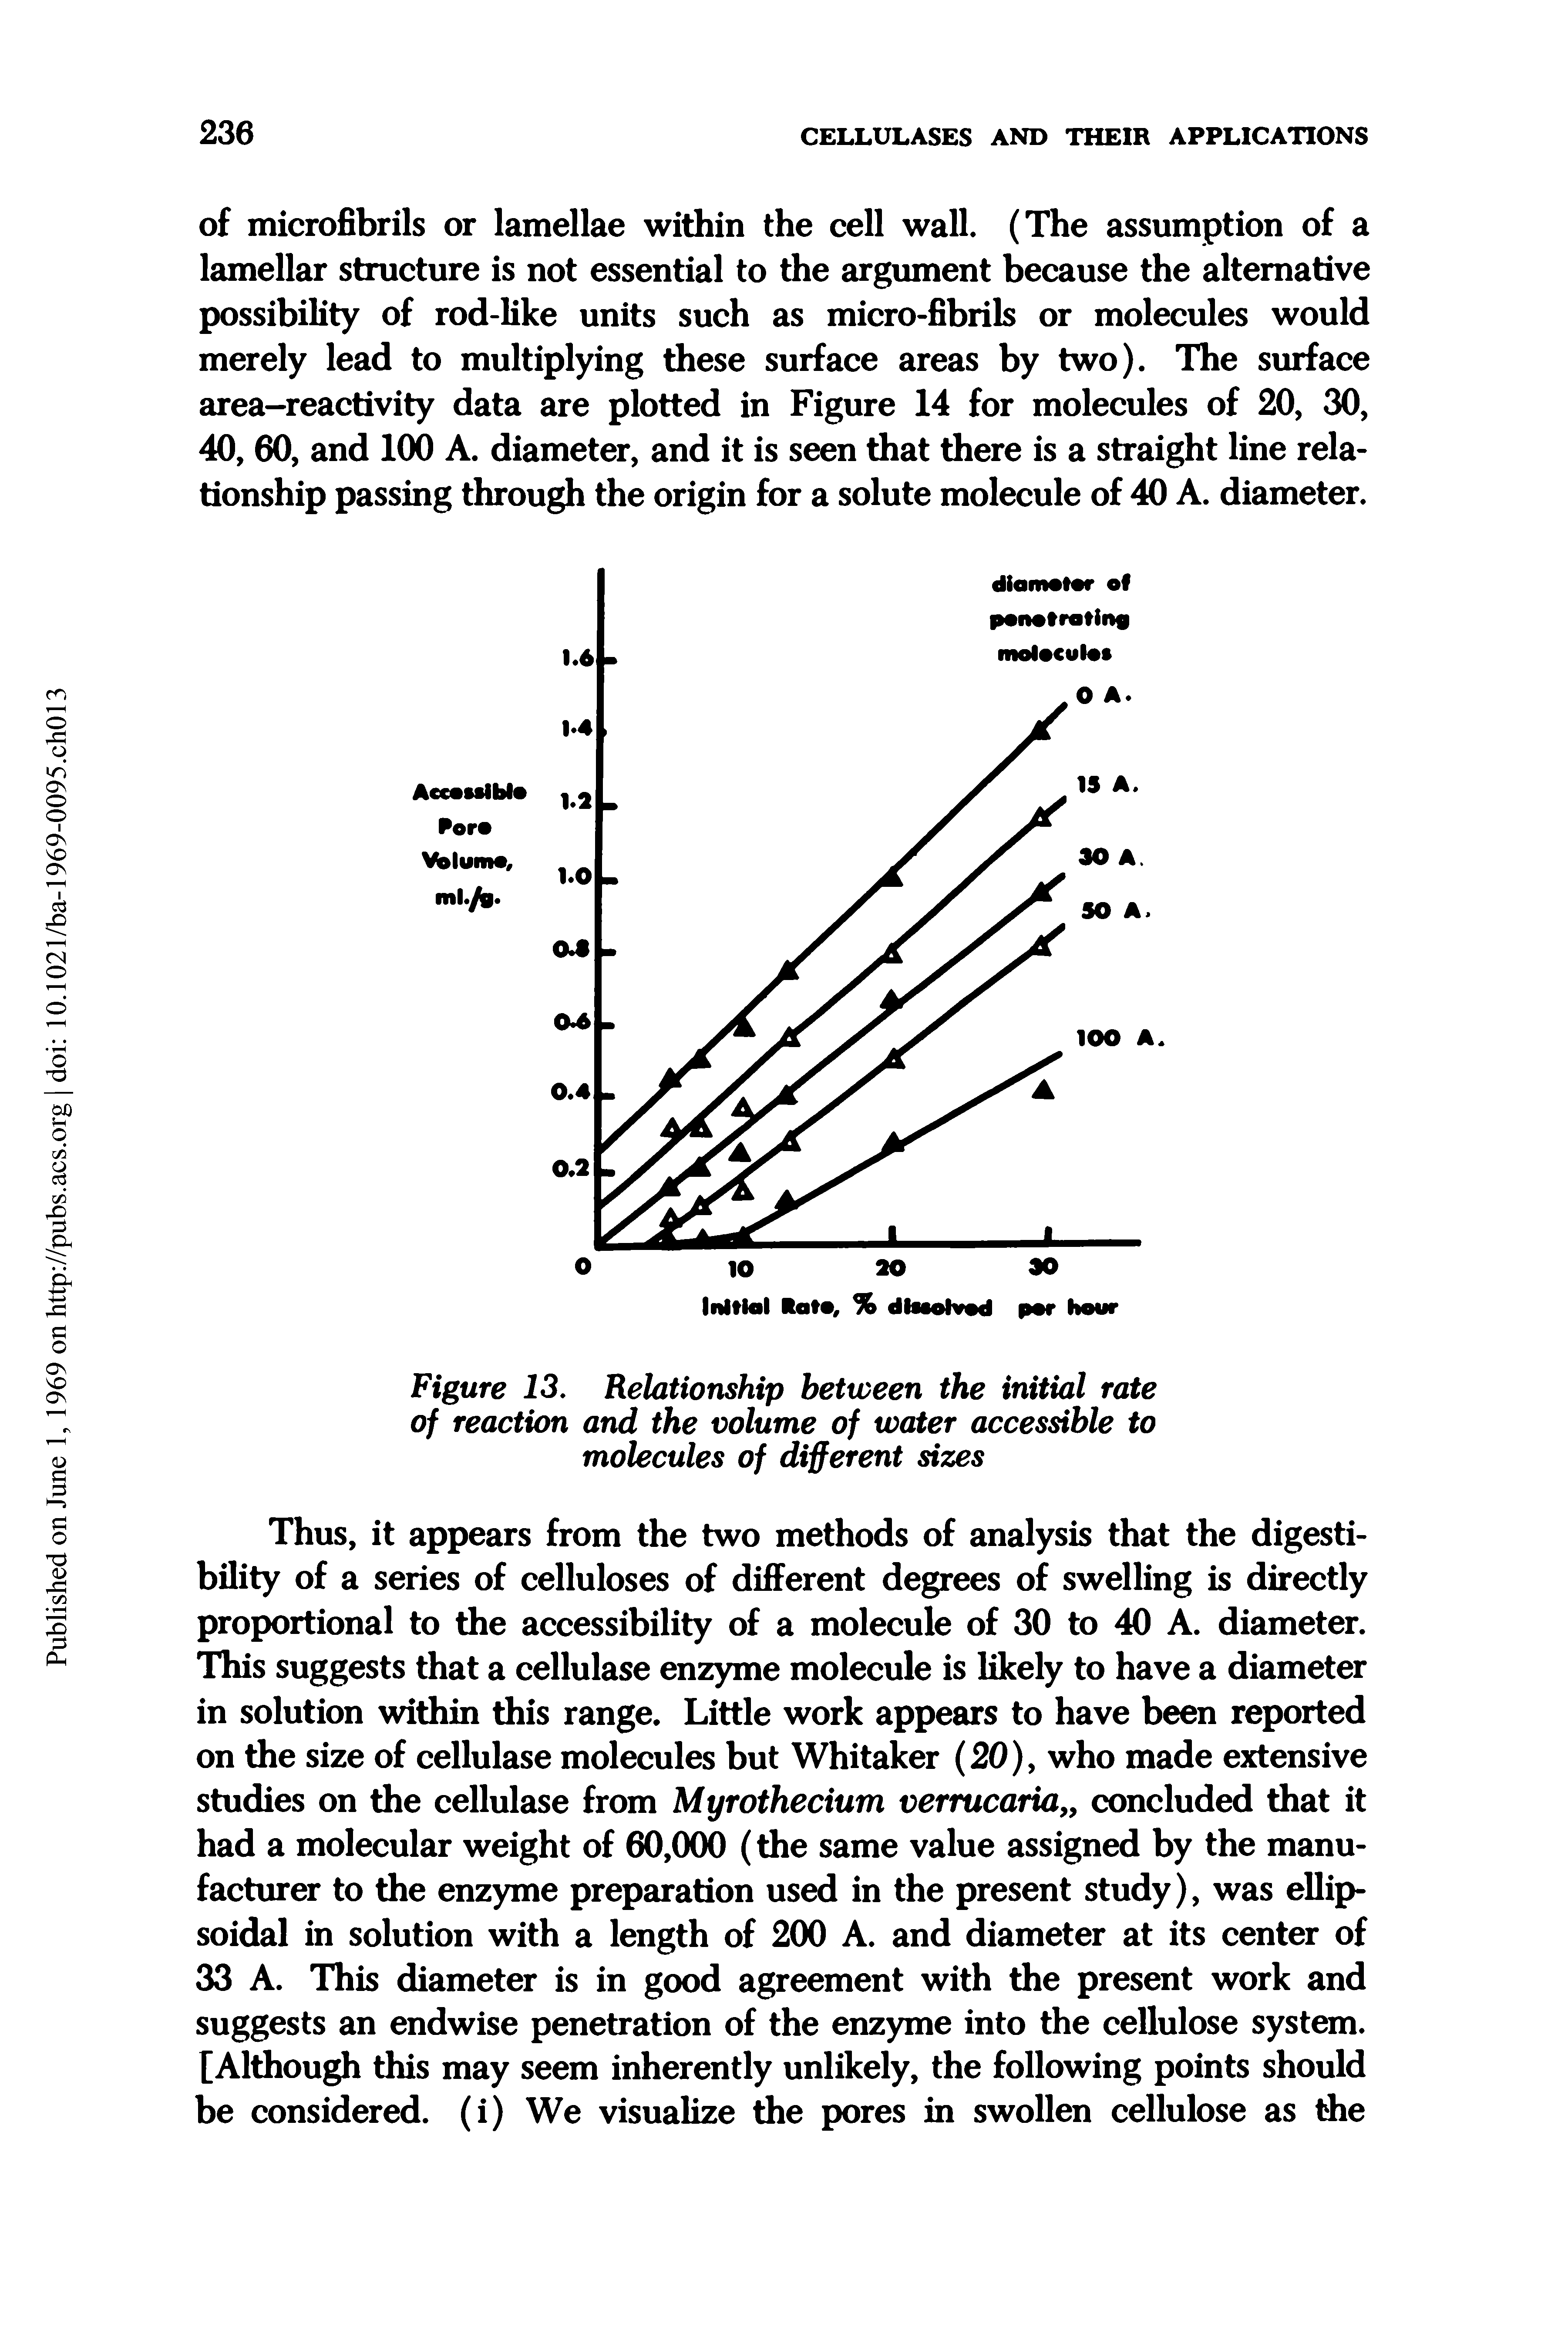 Figure 13. Relationship between the initial rate of reaction and the volume of water accessible to molecules of different sizes...